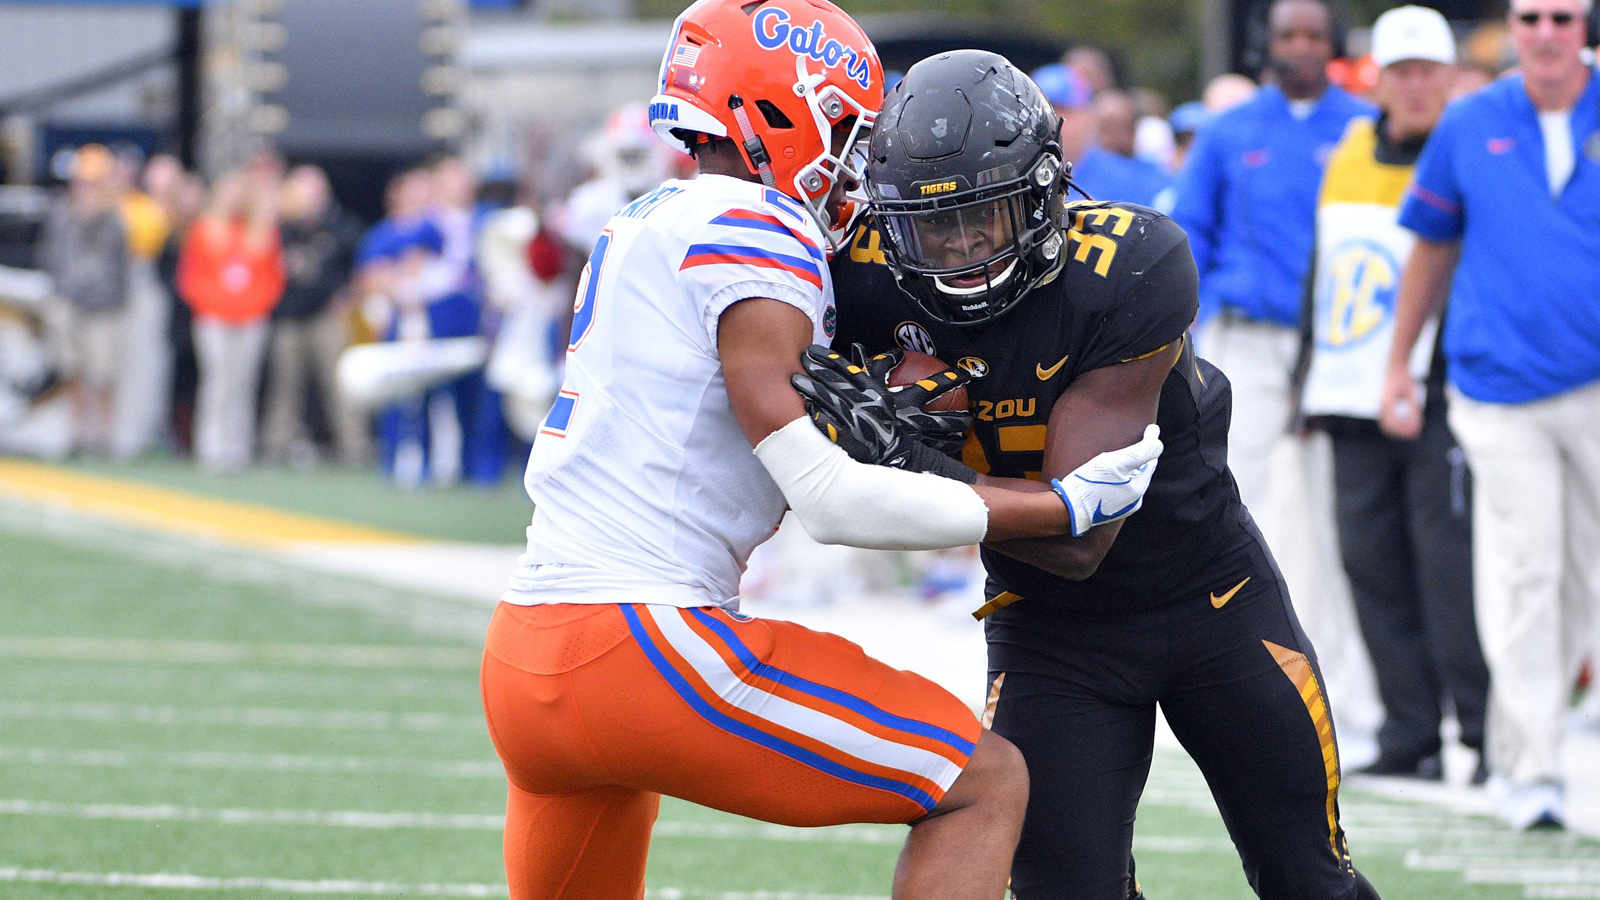 Mizzou's second-half surge continues with 45-16 win over Florida